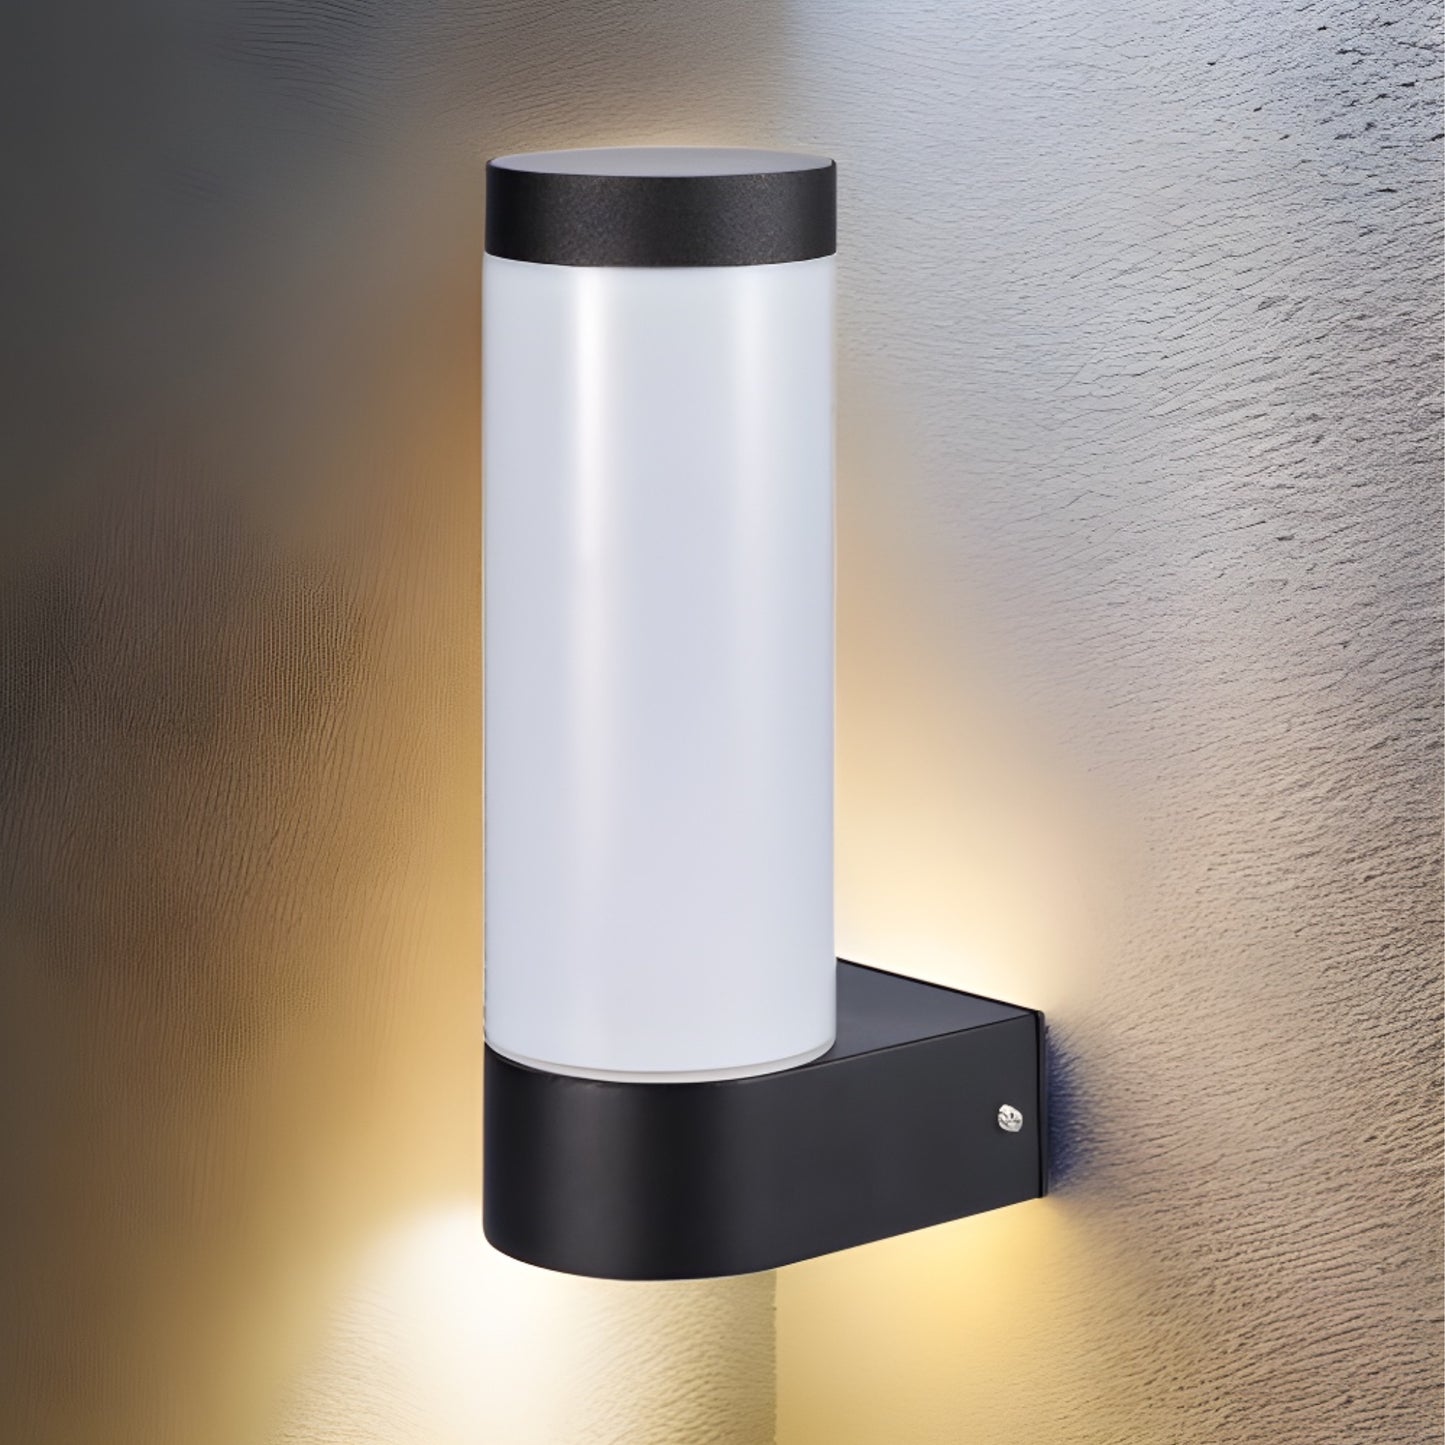 Our Rome grey anthracite outdoor wall light with opal diffuser would look perfect in a modern or more traditional home design. Outside wall lights can provide atmospheric light in your garden, at the front door or on the terrace as well as a great security solution. It is designed for durability and longevity with its robust material producing a fully weatherproof and water resistant light fitting.